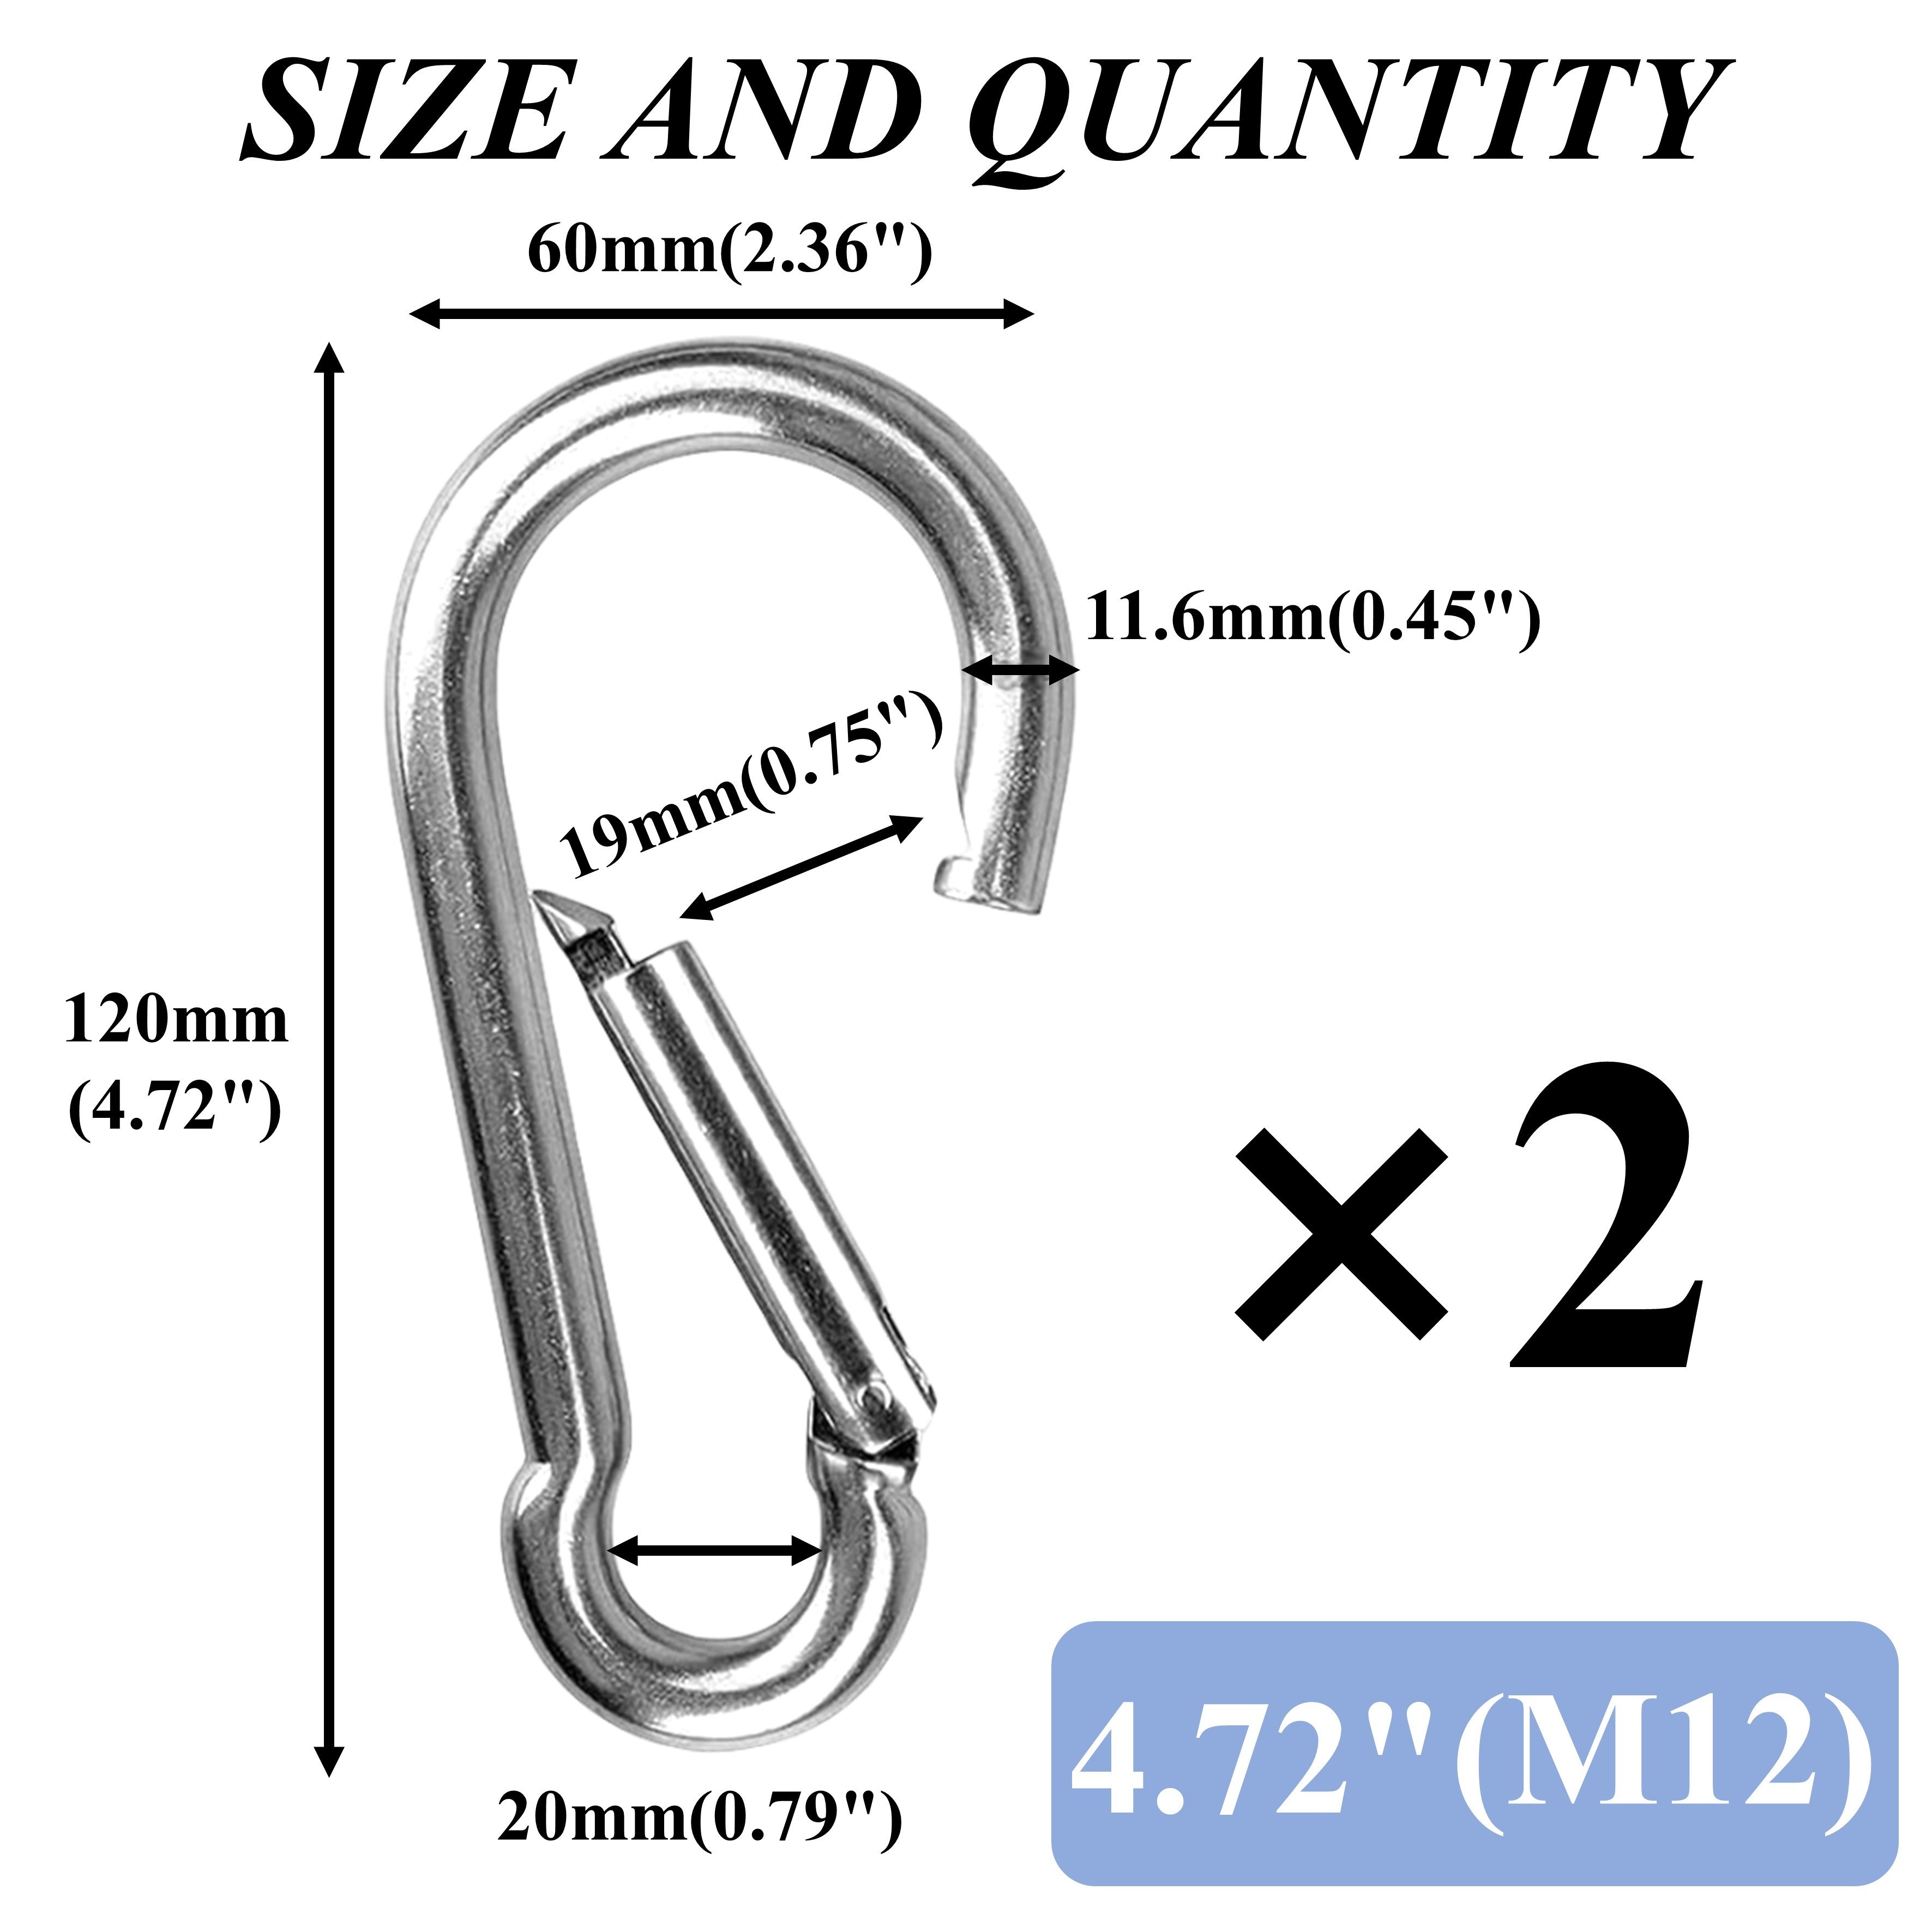 32mmx14mm Black Alloy Carabiner Clip,20pcs Metal DUAL Gated Spring Snap Hook  Clasp,s Biner Carabiner Key Chains for Rock Climbing Gifts -  UK